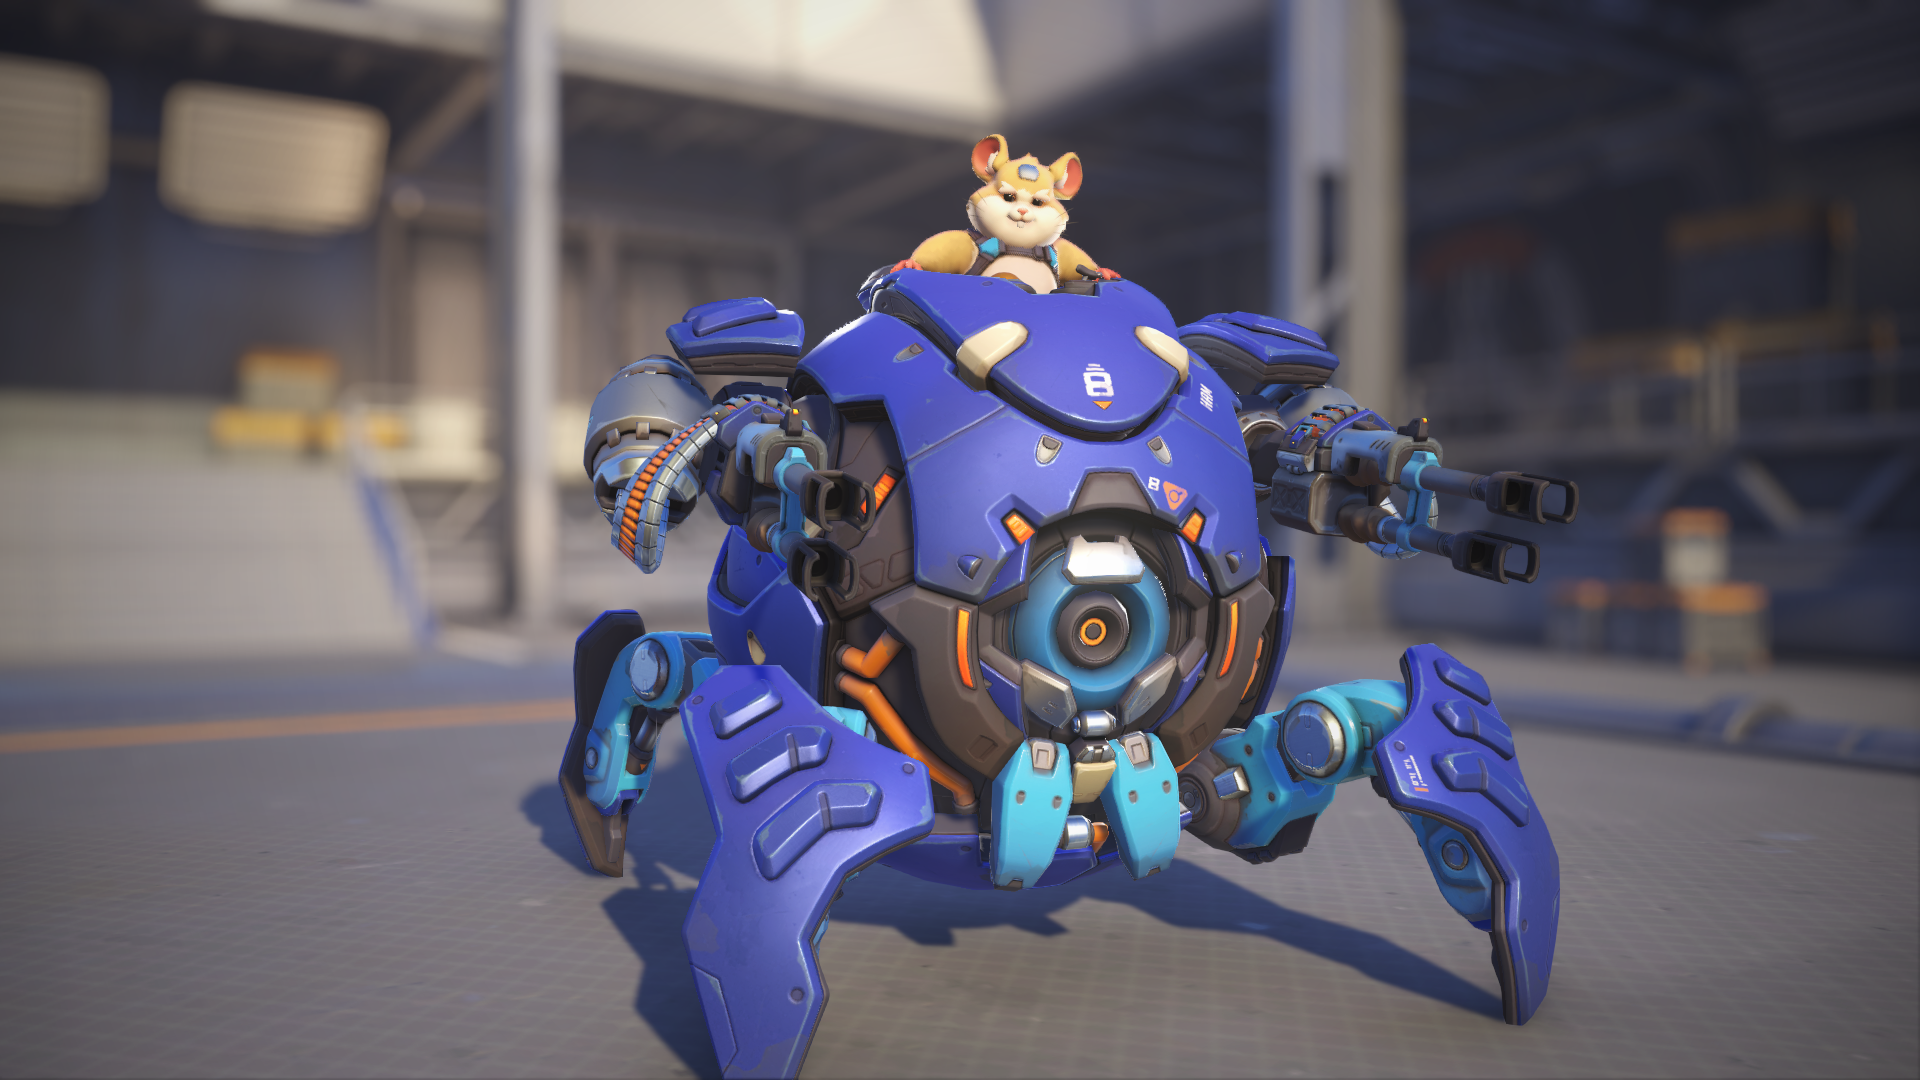 Wrecking Ball models his Chloride skin in Overwatch 2.